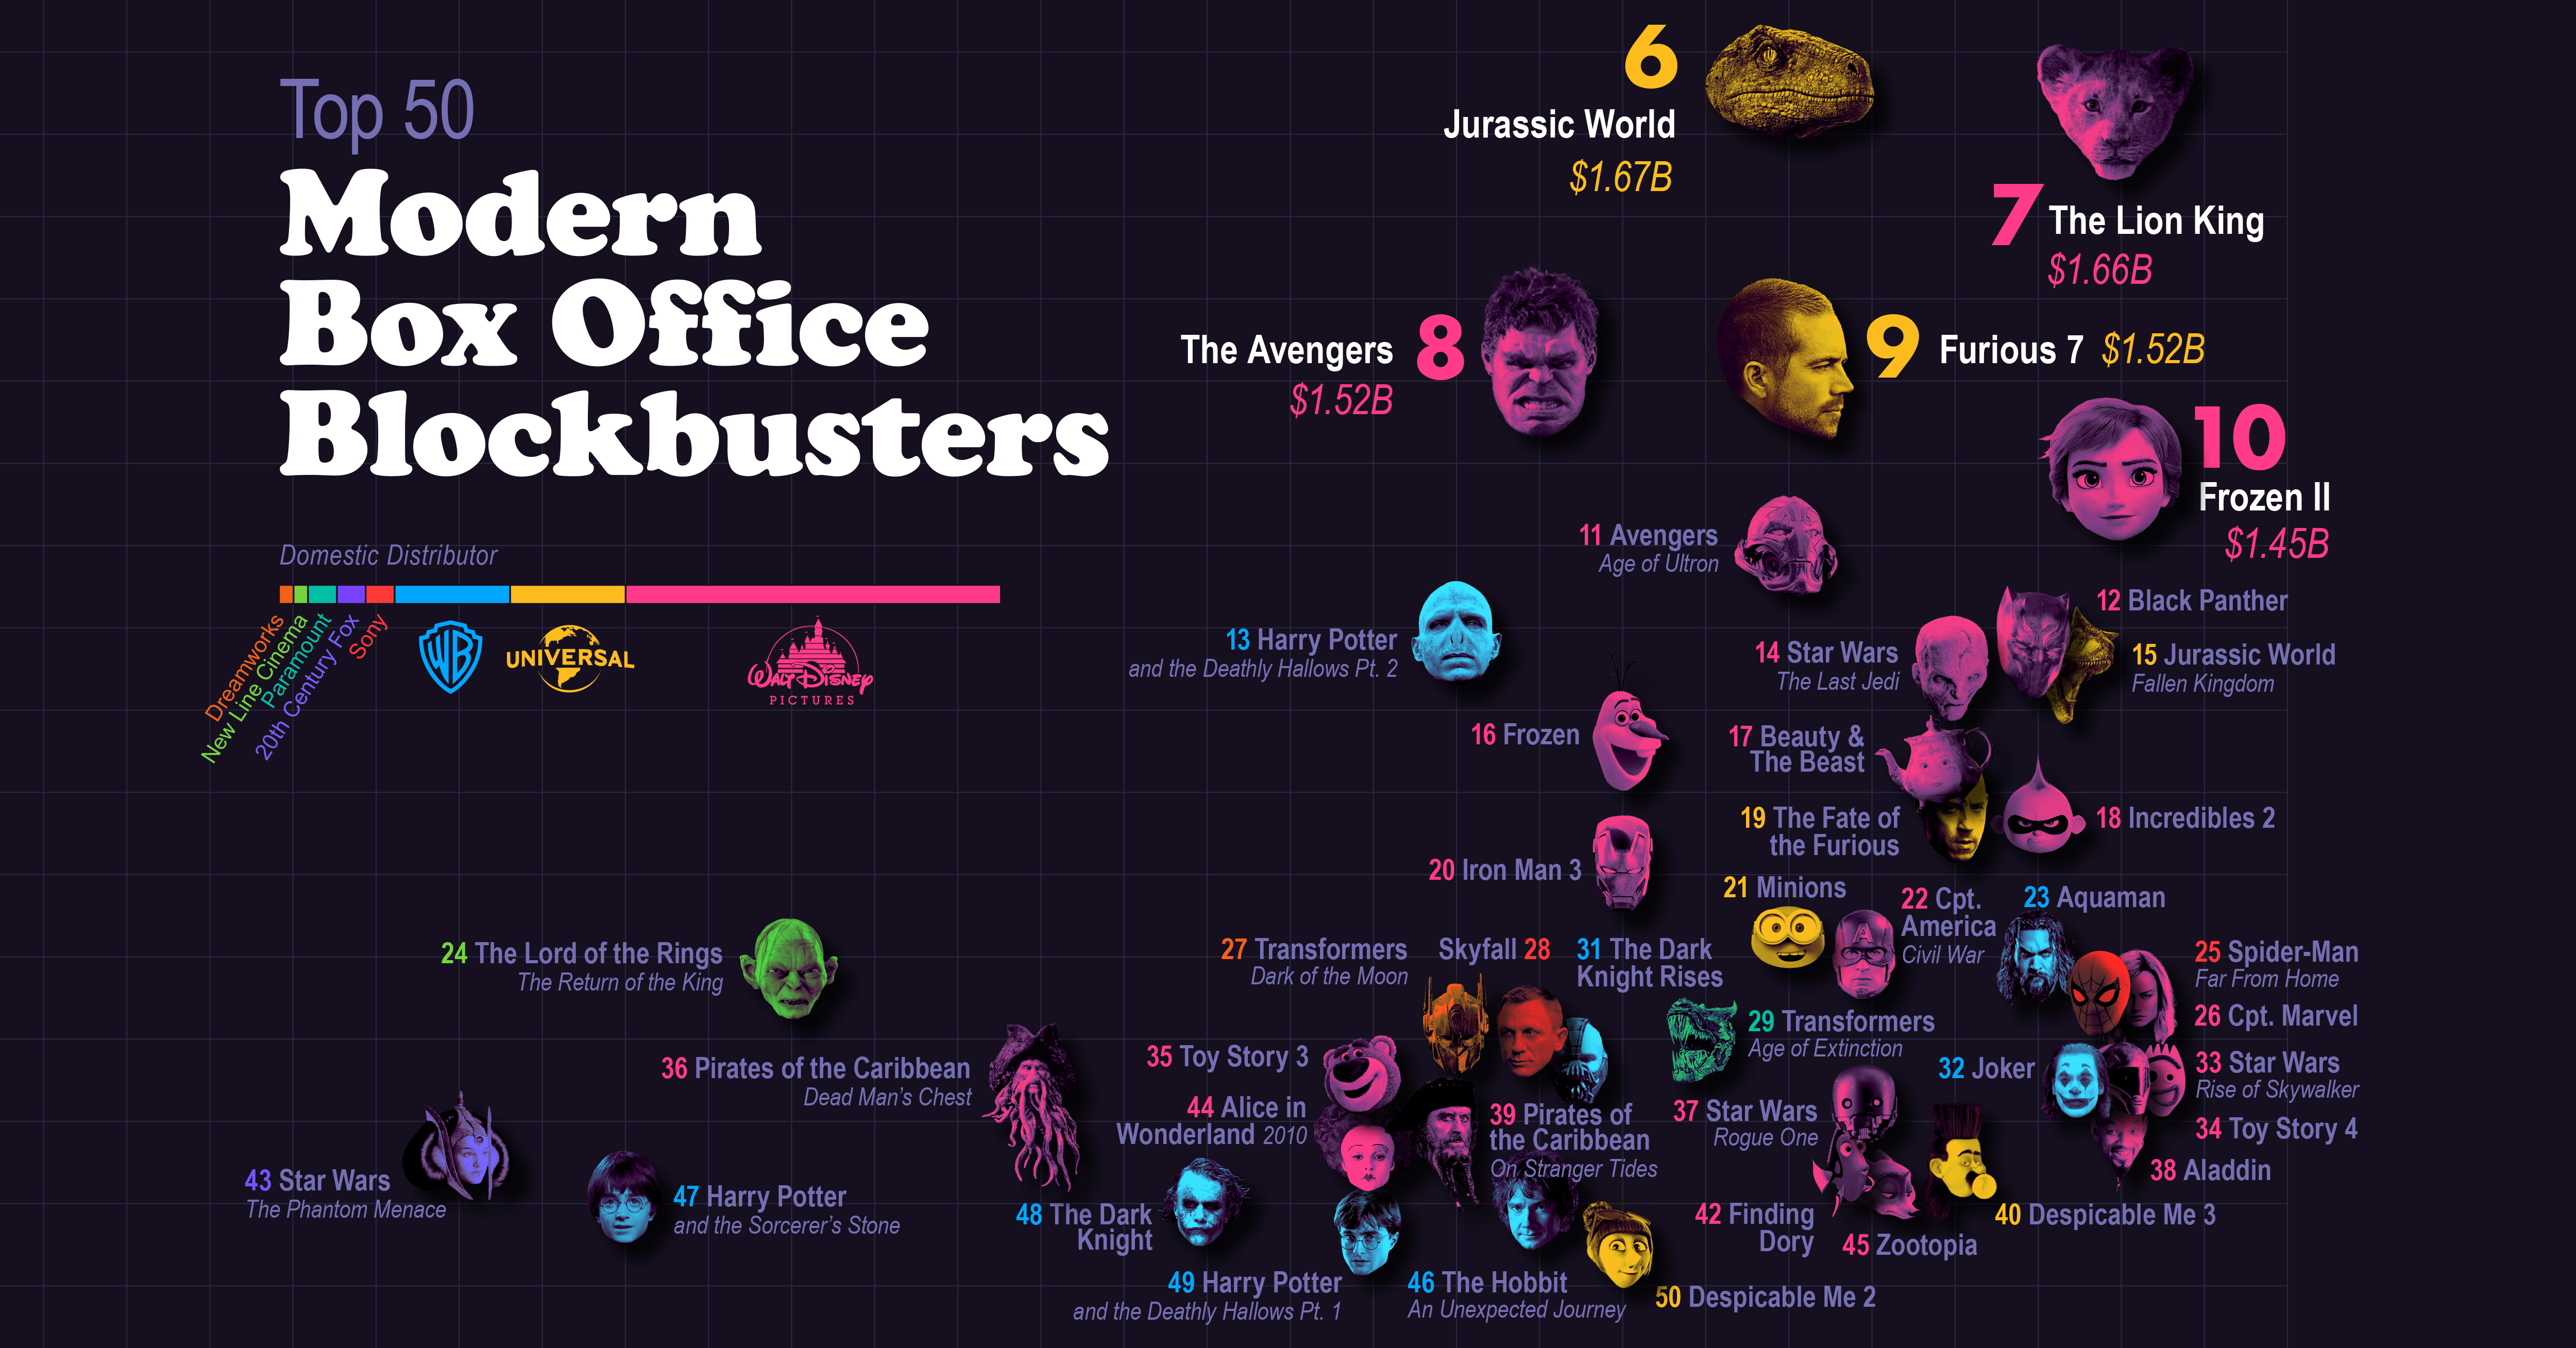 50 highest grossing movies